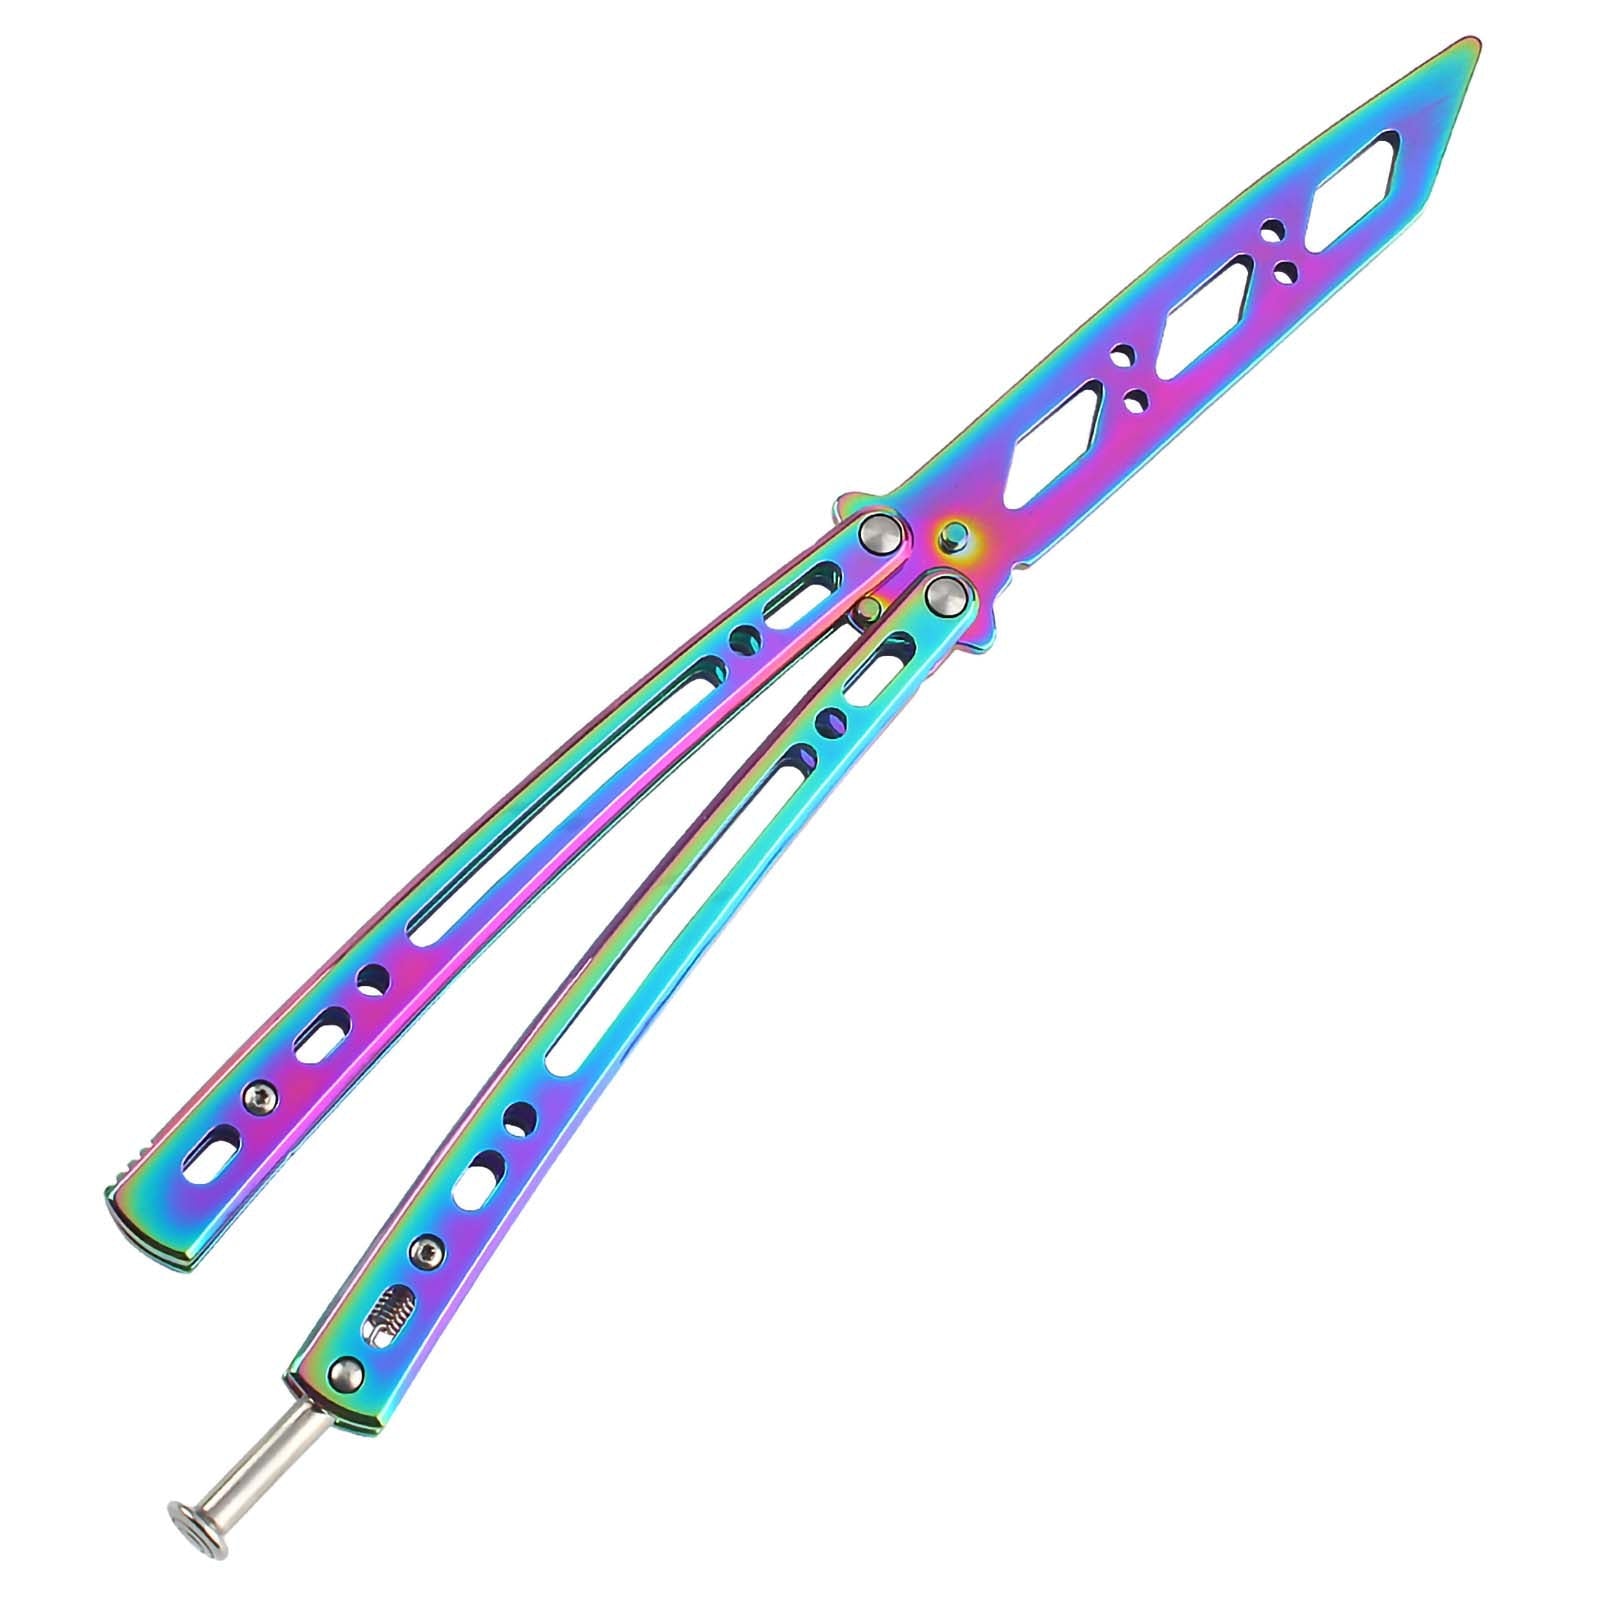 Andux Balisong Training Tool CS/HDD29 Colorful(Only Available in European Countries)